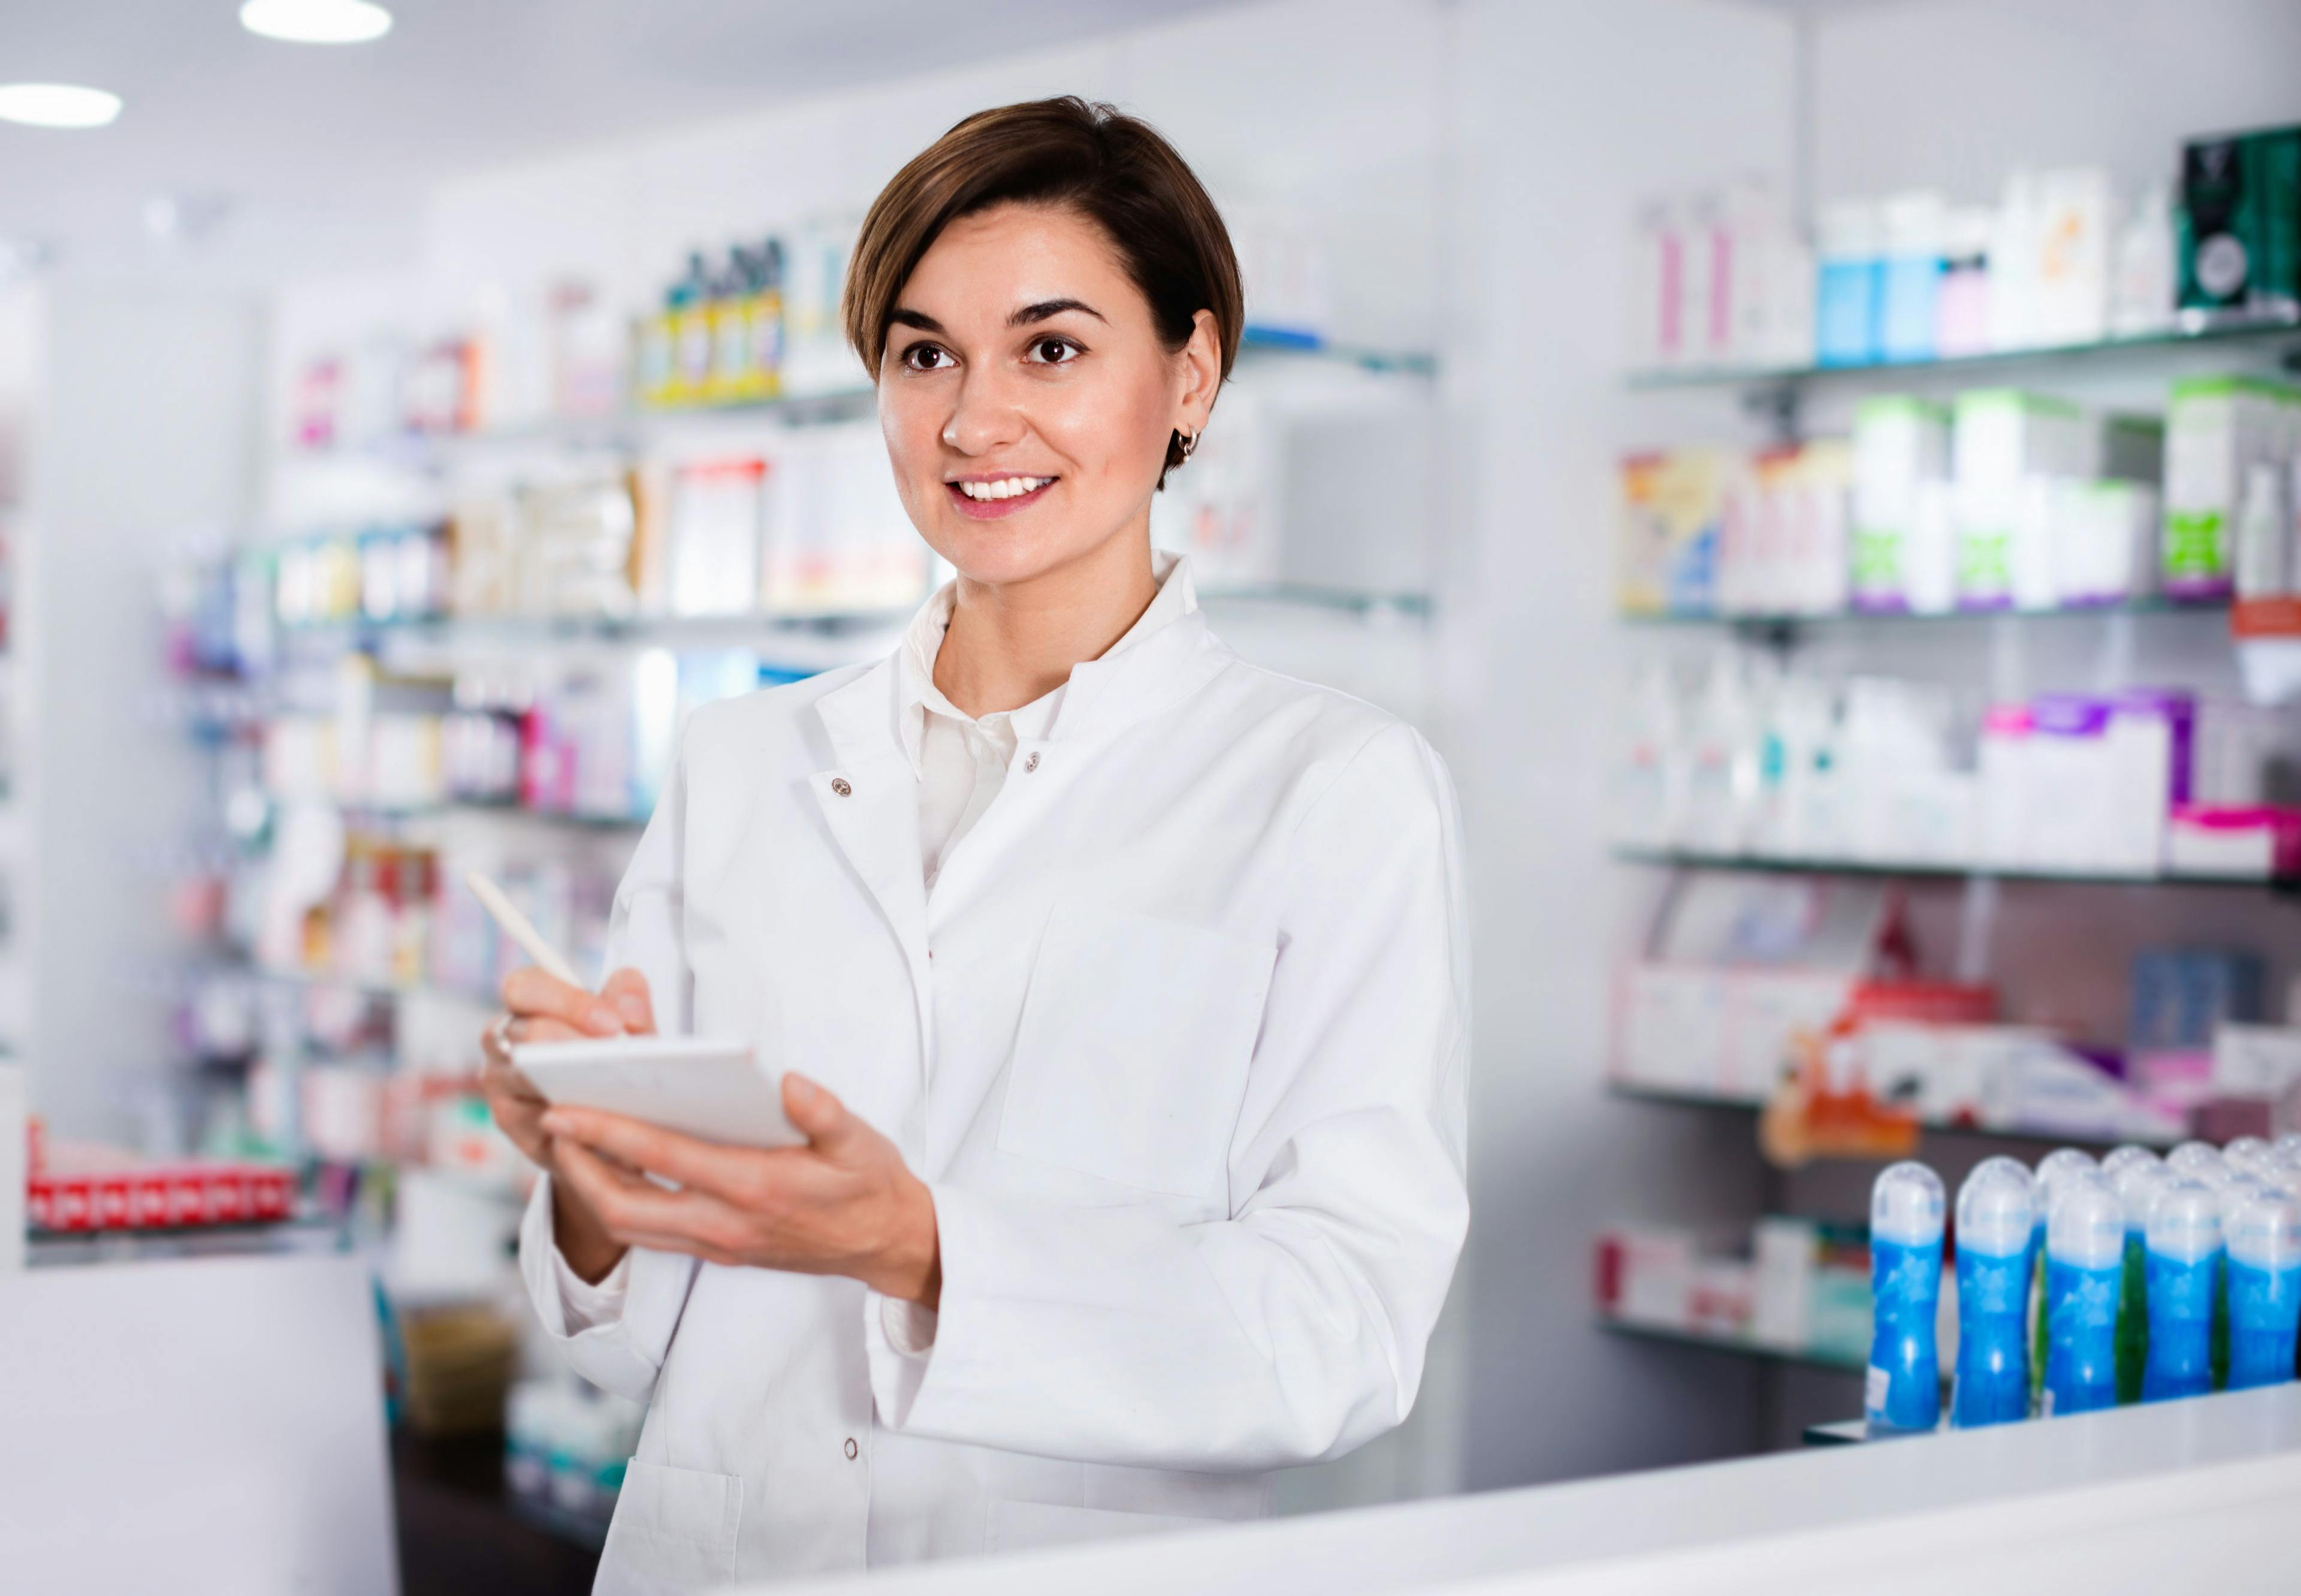 Accountable Care Organization Review Recognizes the Value of Pharmacists